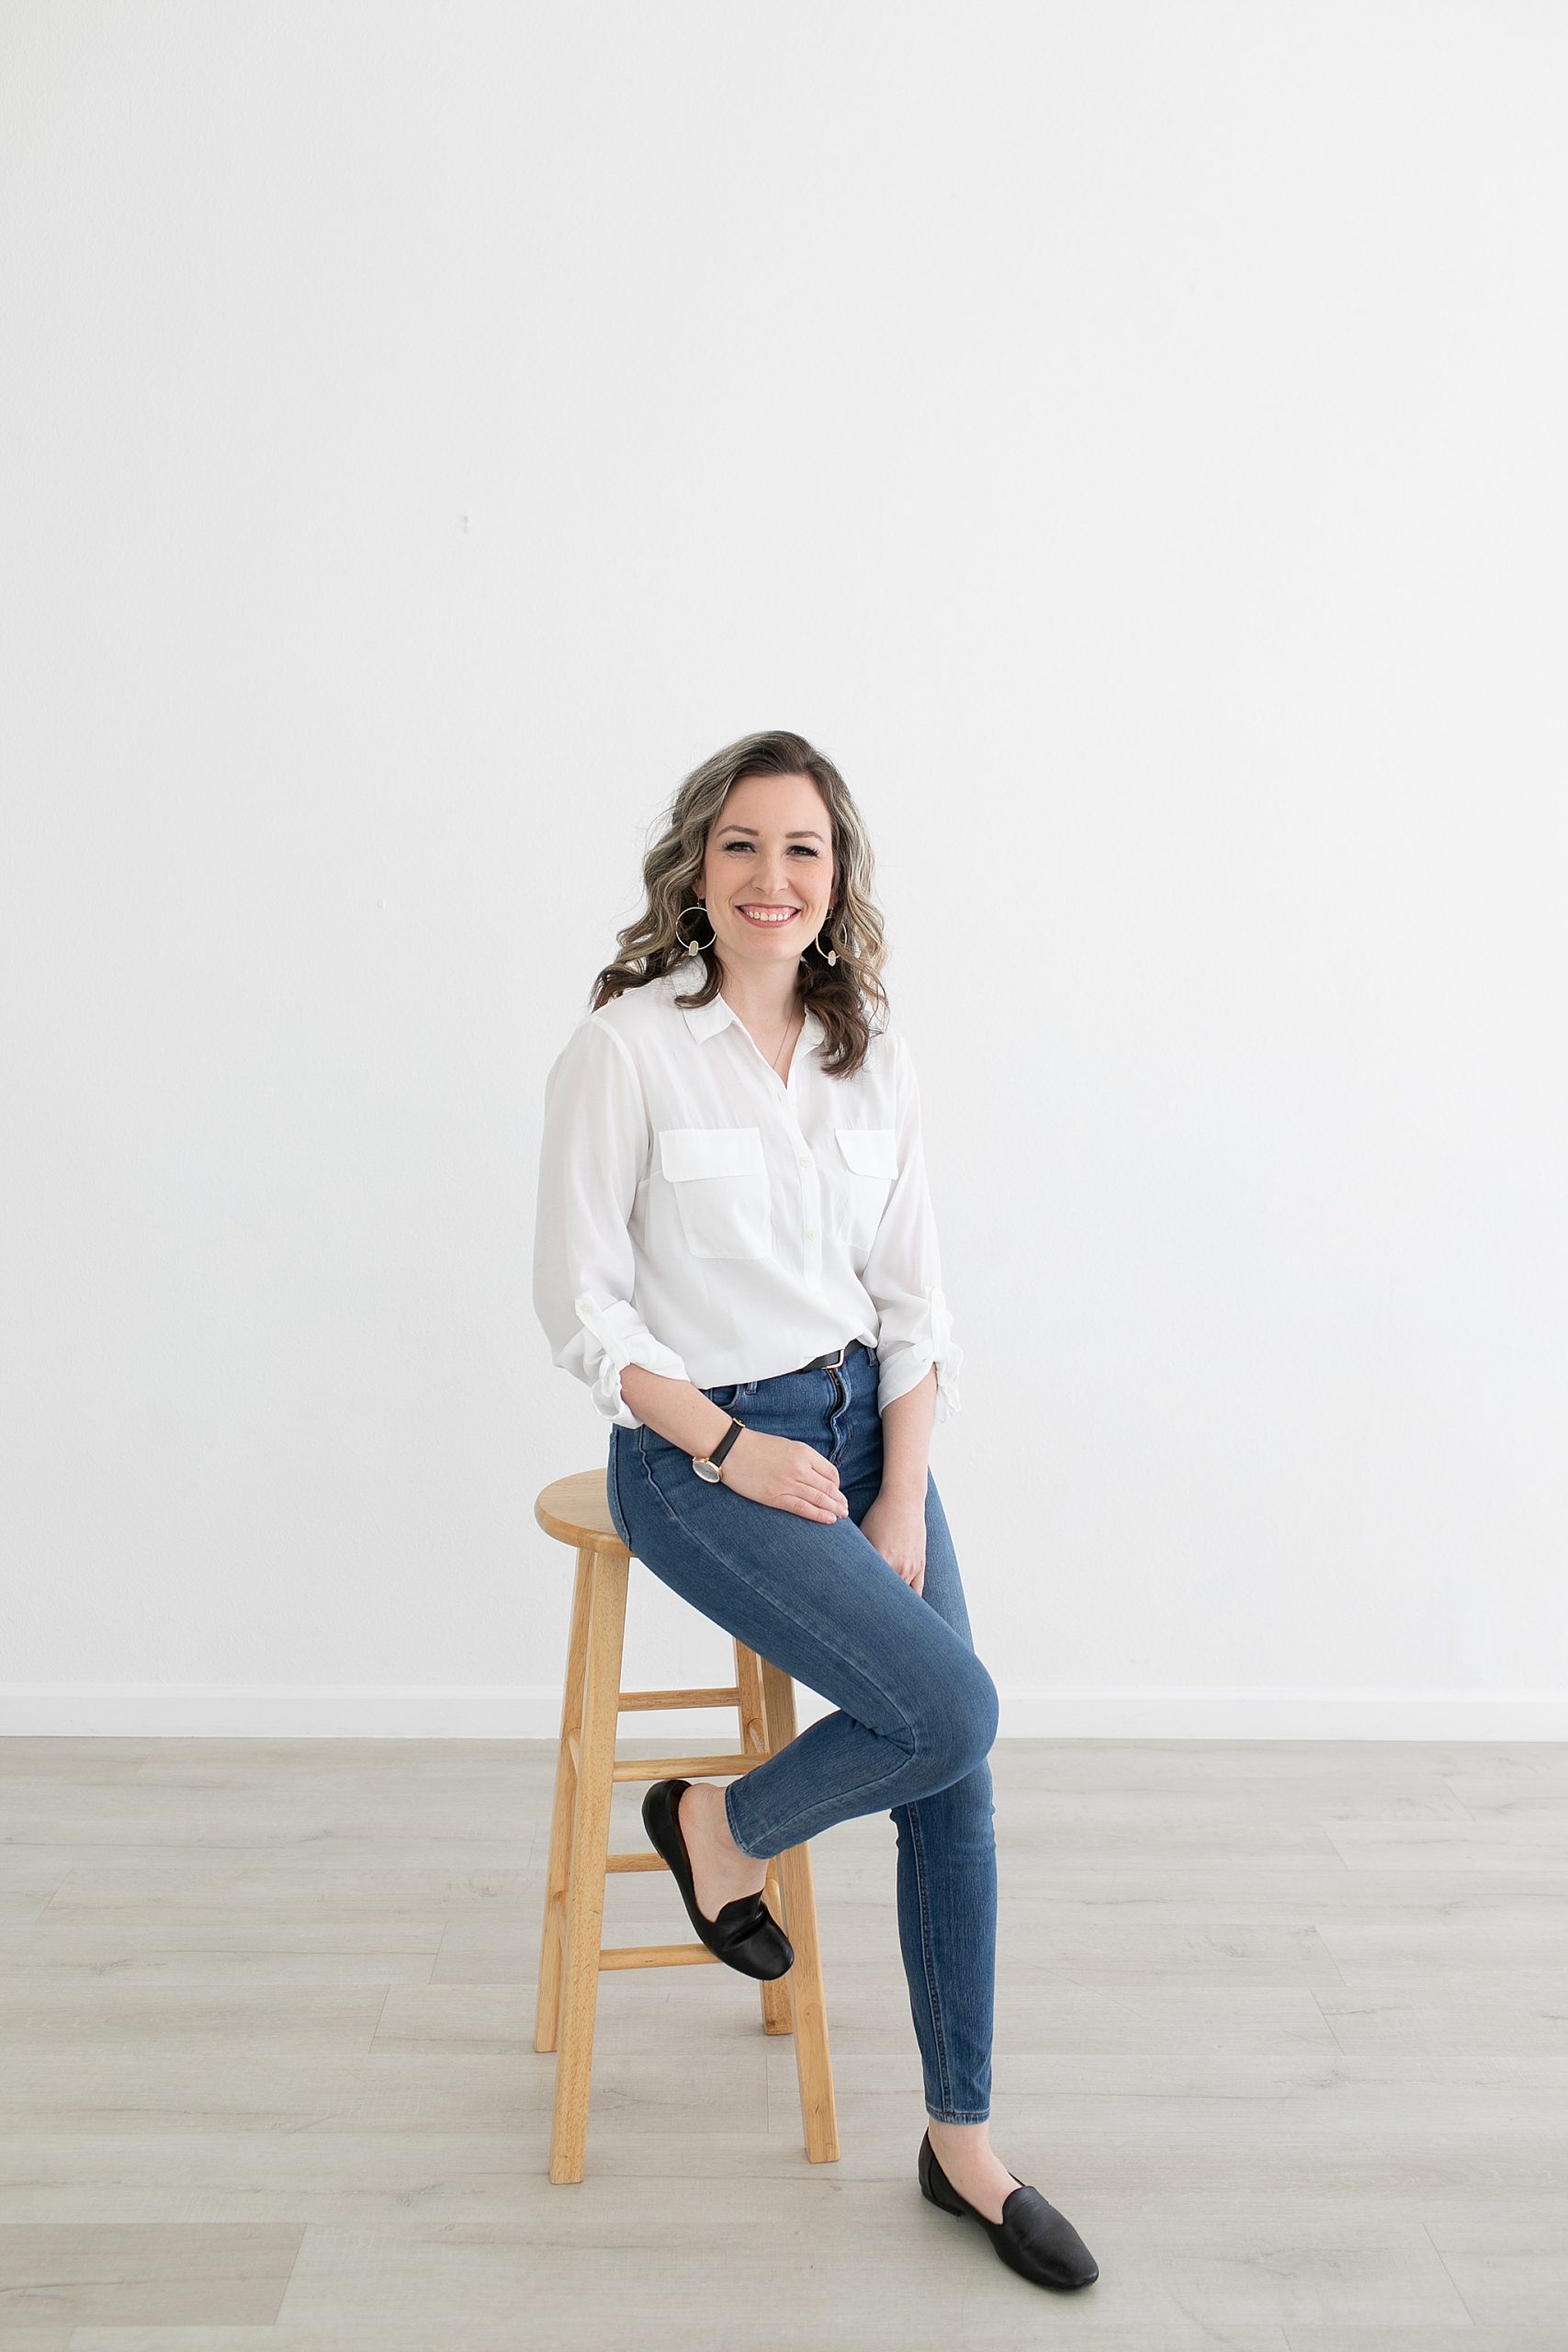 wedding planner sits on stool in white shirt and jeans